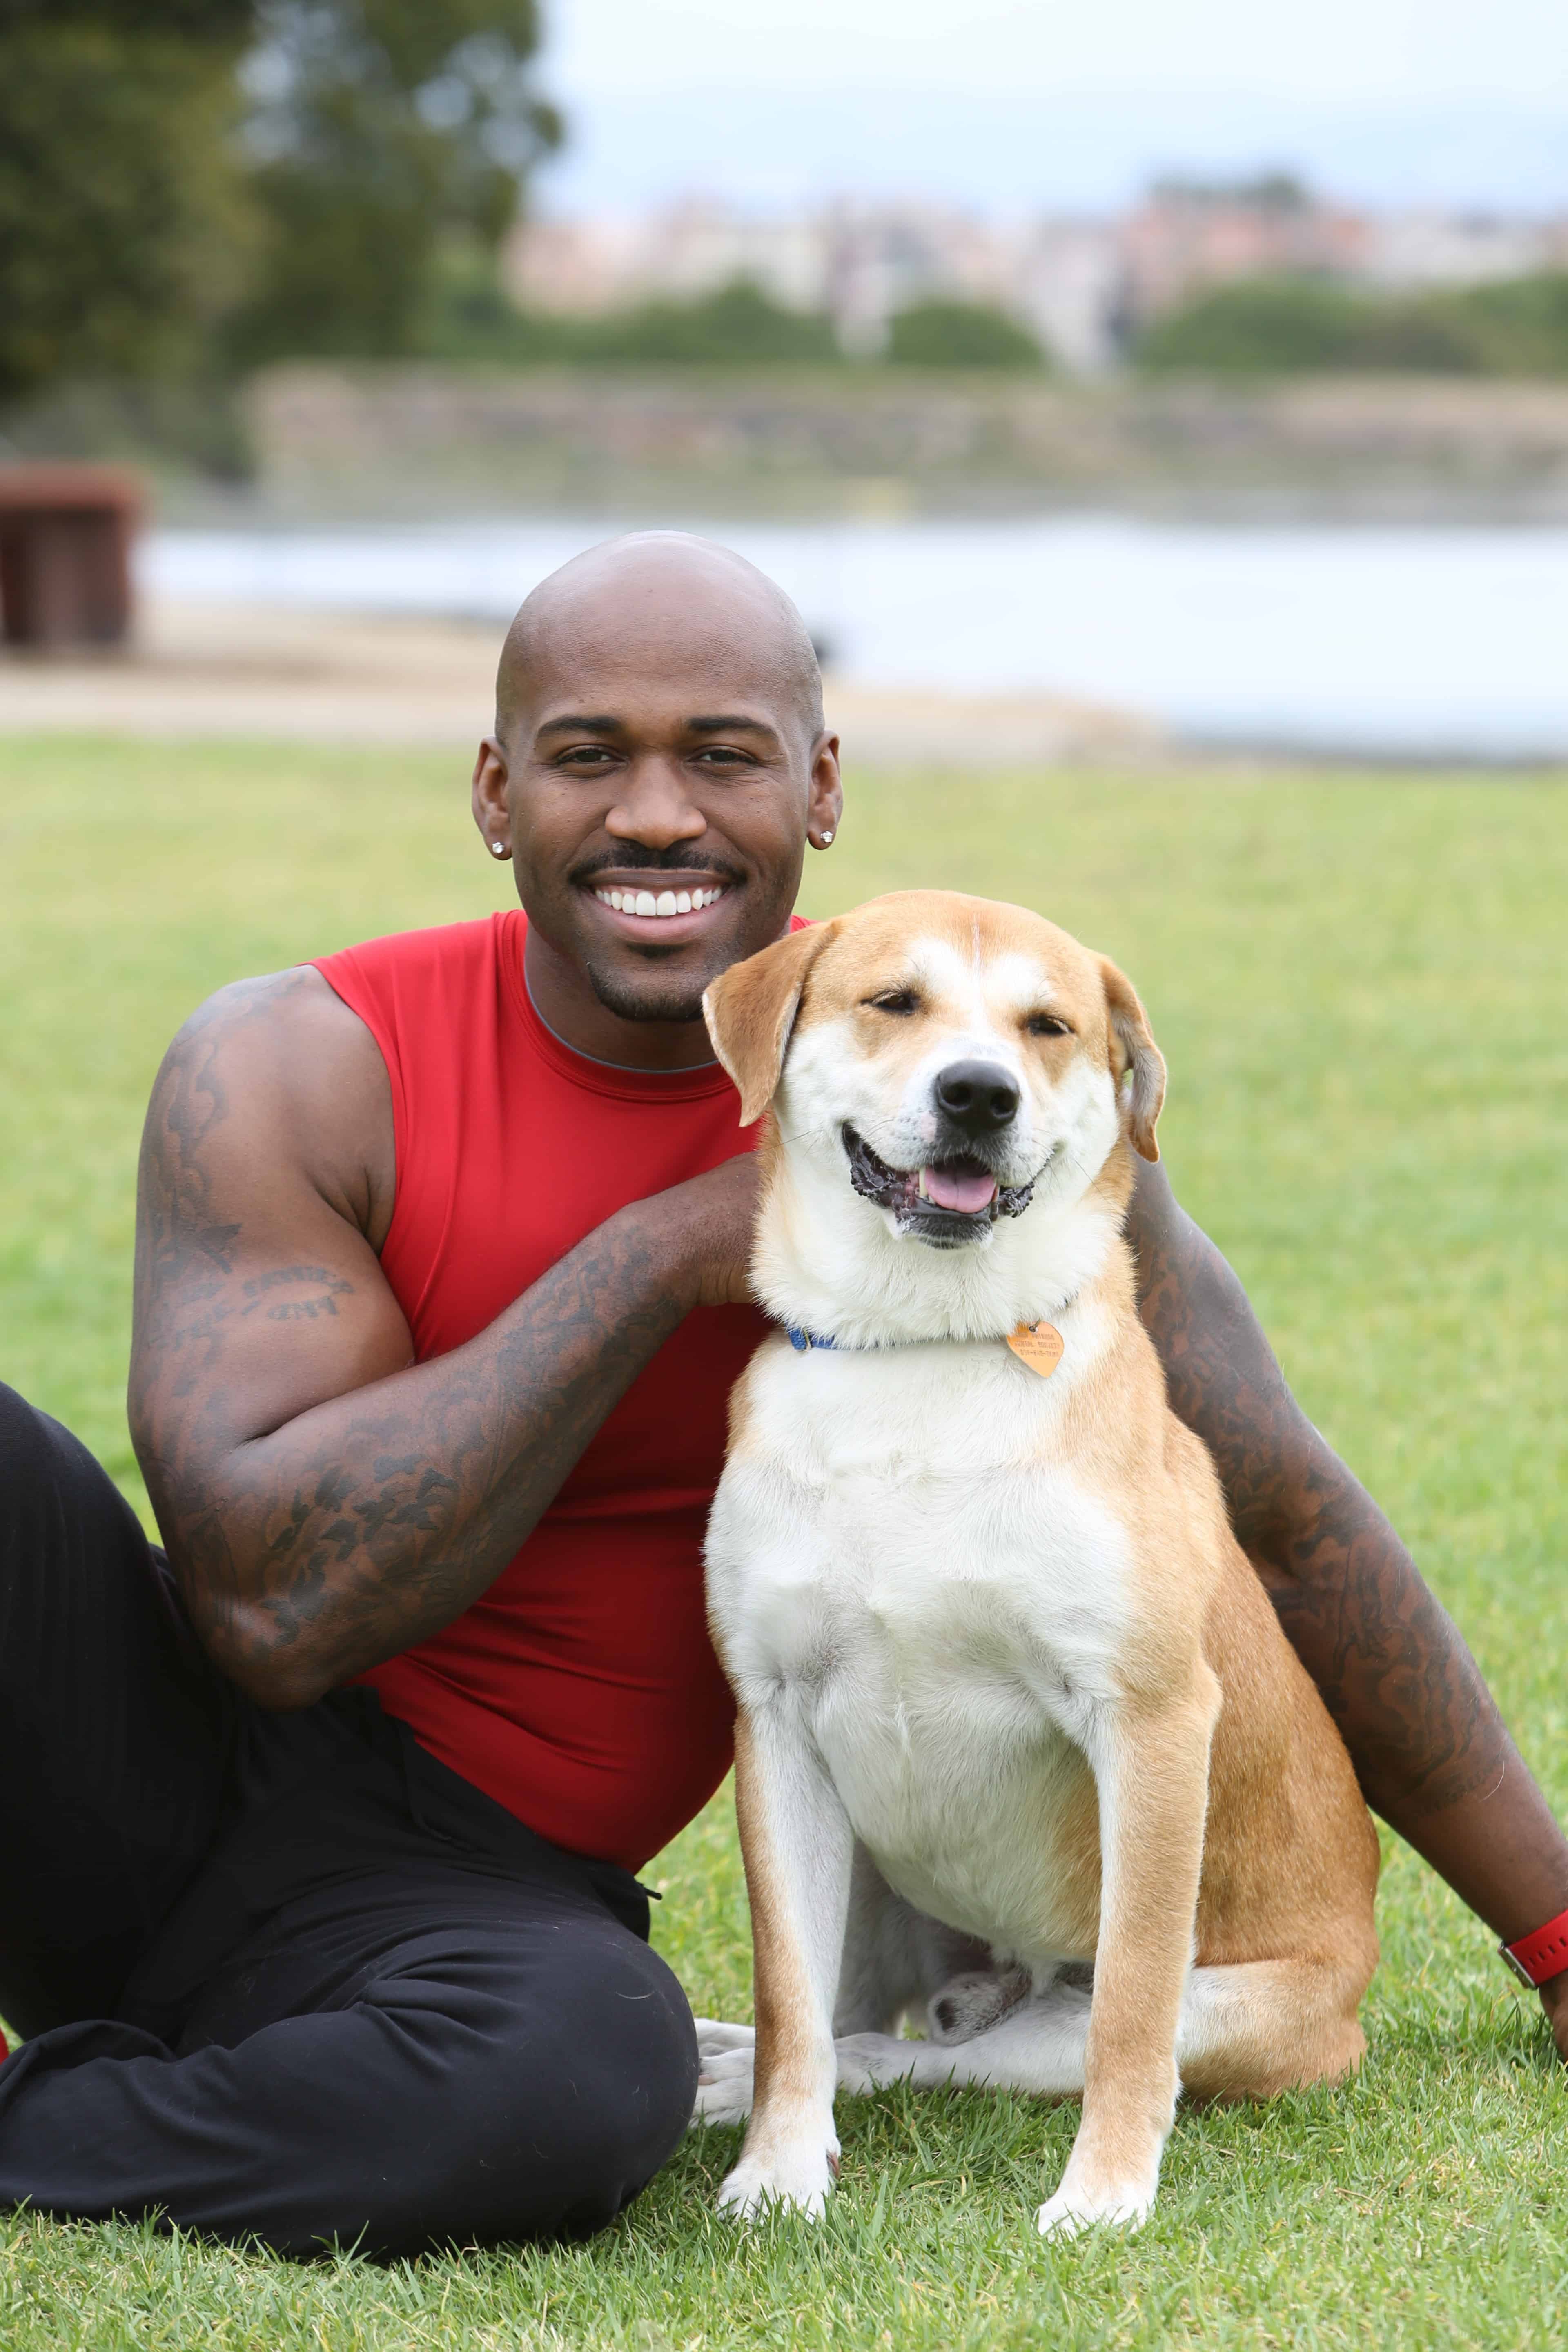 5 Day Dolvett Quince Workout Plan for push your ABS